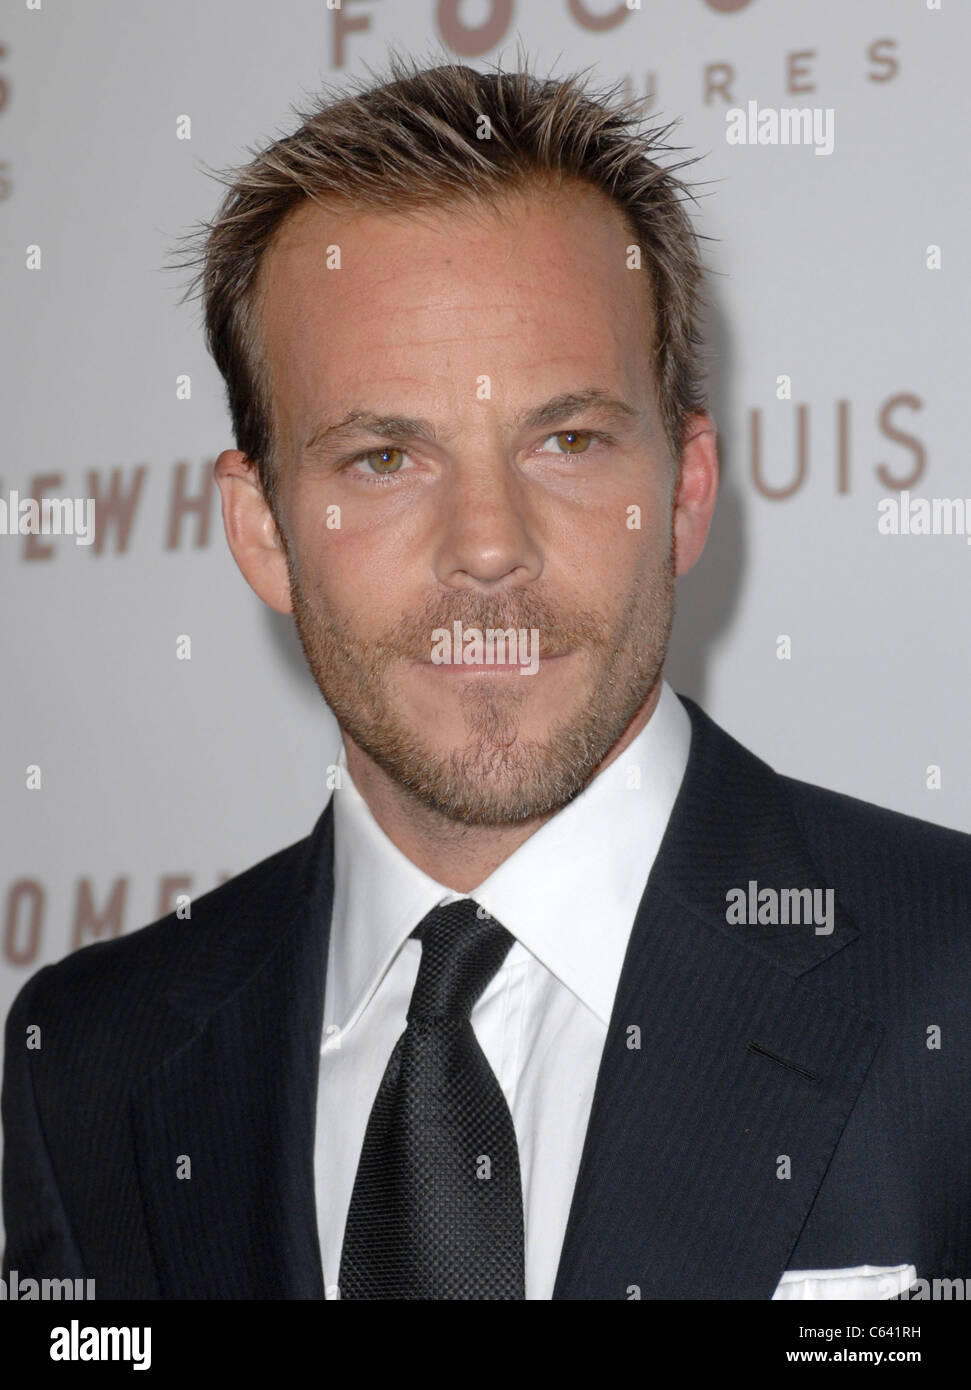 Stephen Dorff at arrivals for SOMEWHERE Premiere, Arclight Hollywood, Los Angeles, CA December 7, 2010. Photo By: Elizabeth Goodenough/Everett Collection Stock Photo